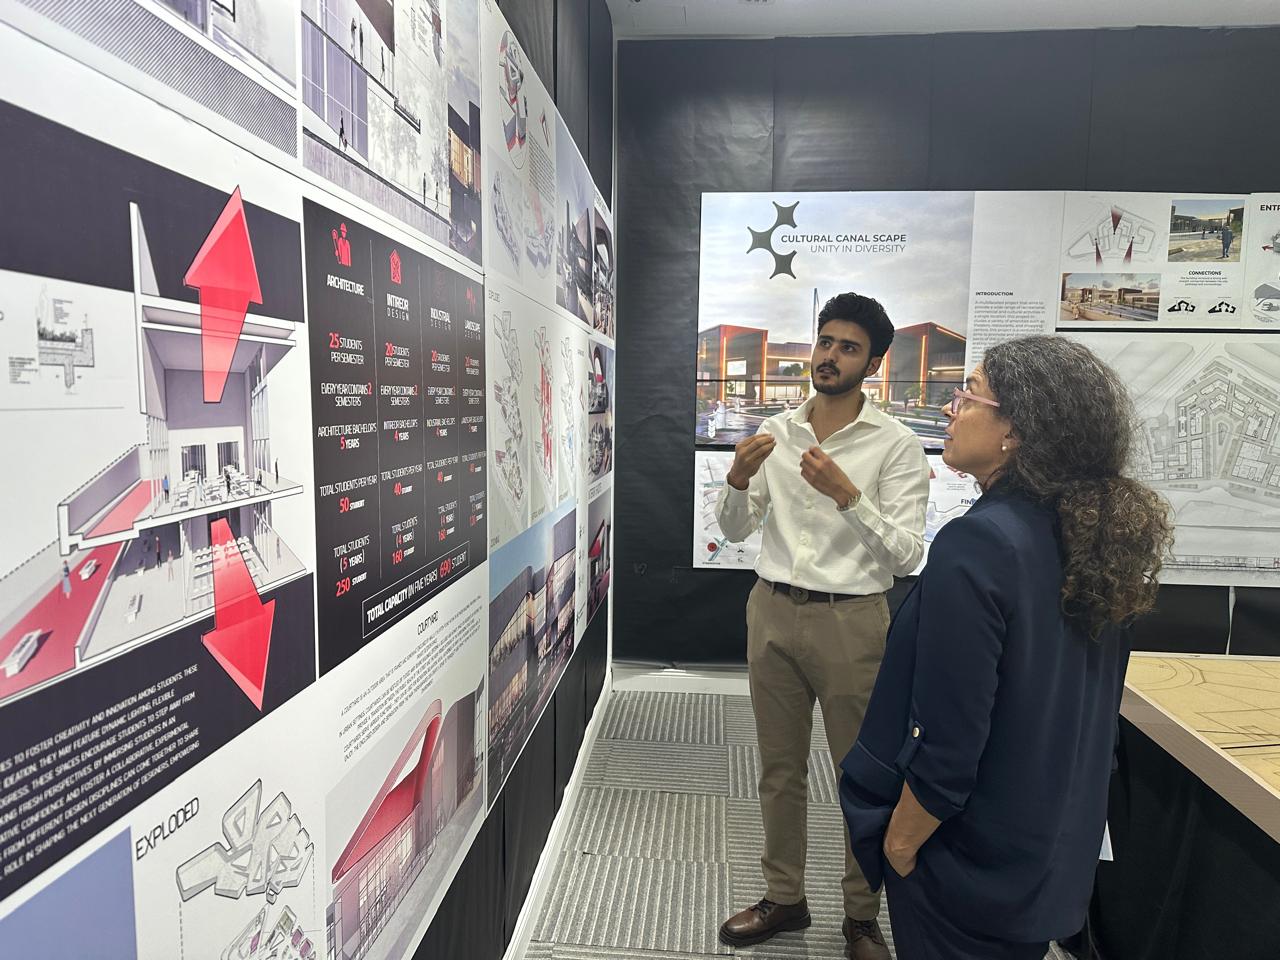 Khoury visits the Bernici University of Architecture and Urbanism in the city of Benghazi.